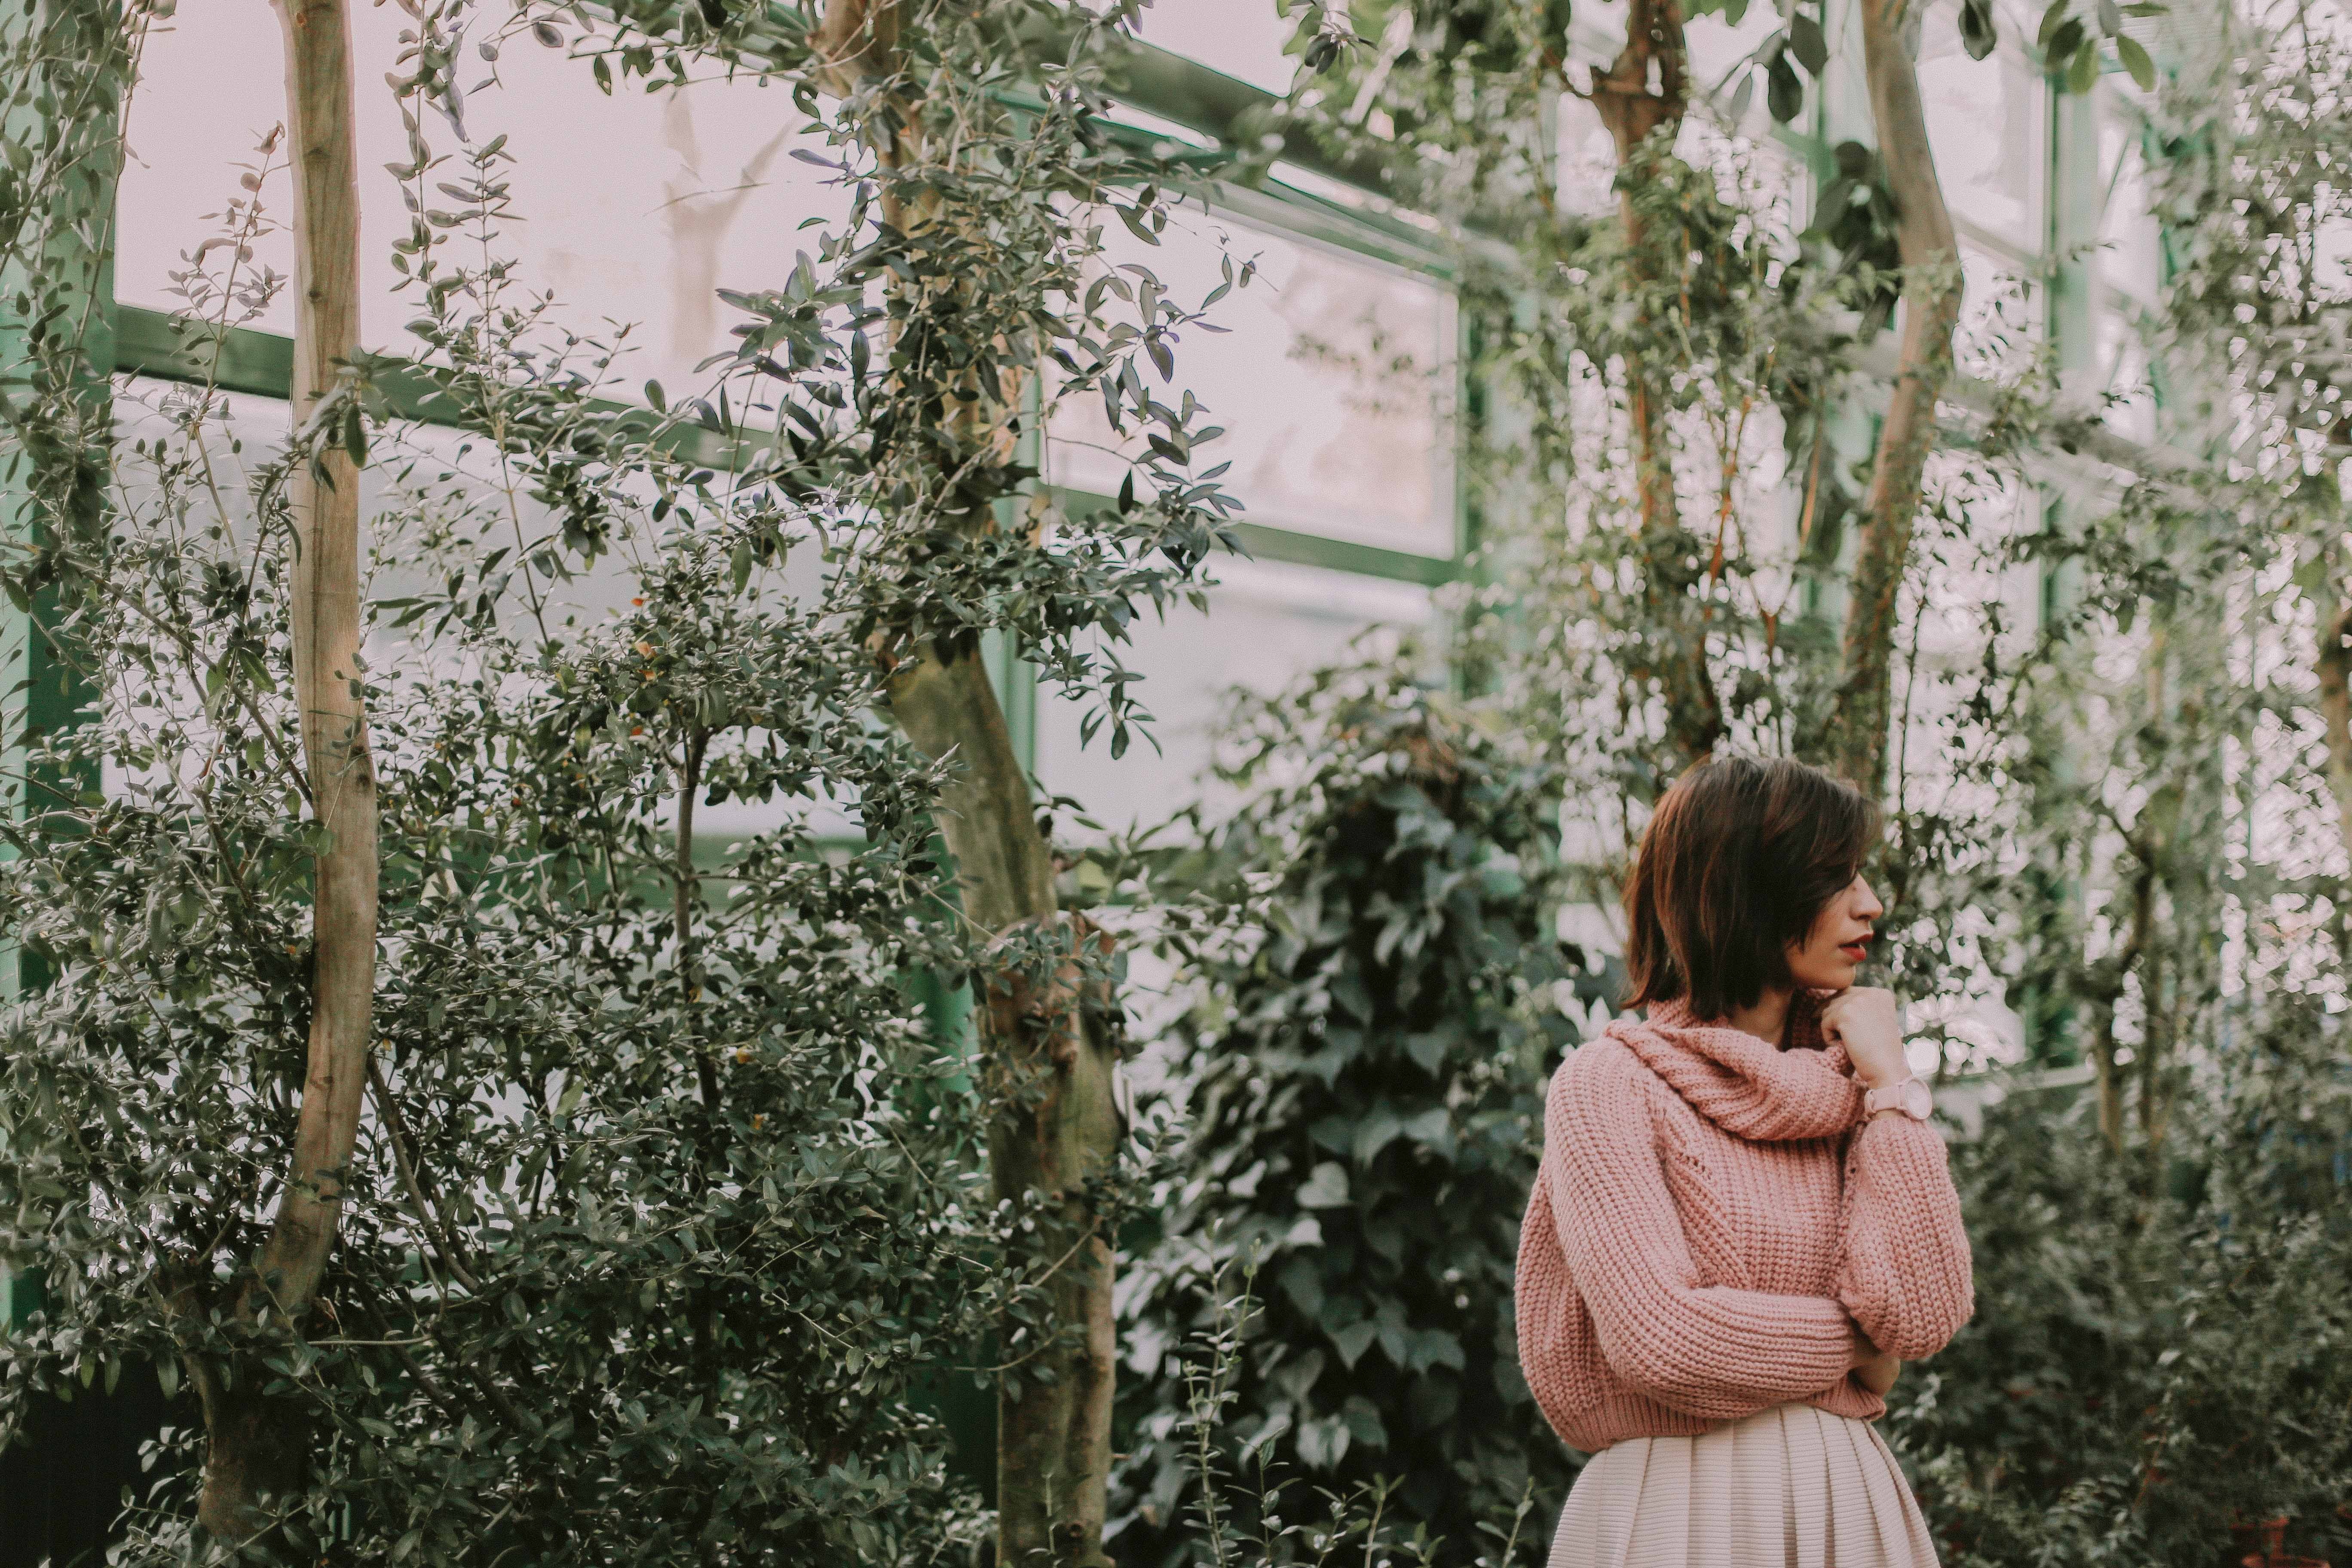 woman wearing pink knitted sweater and pink skirt at the back theres a green hanging plants